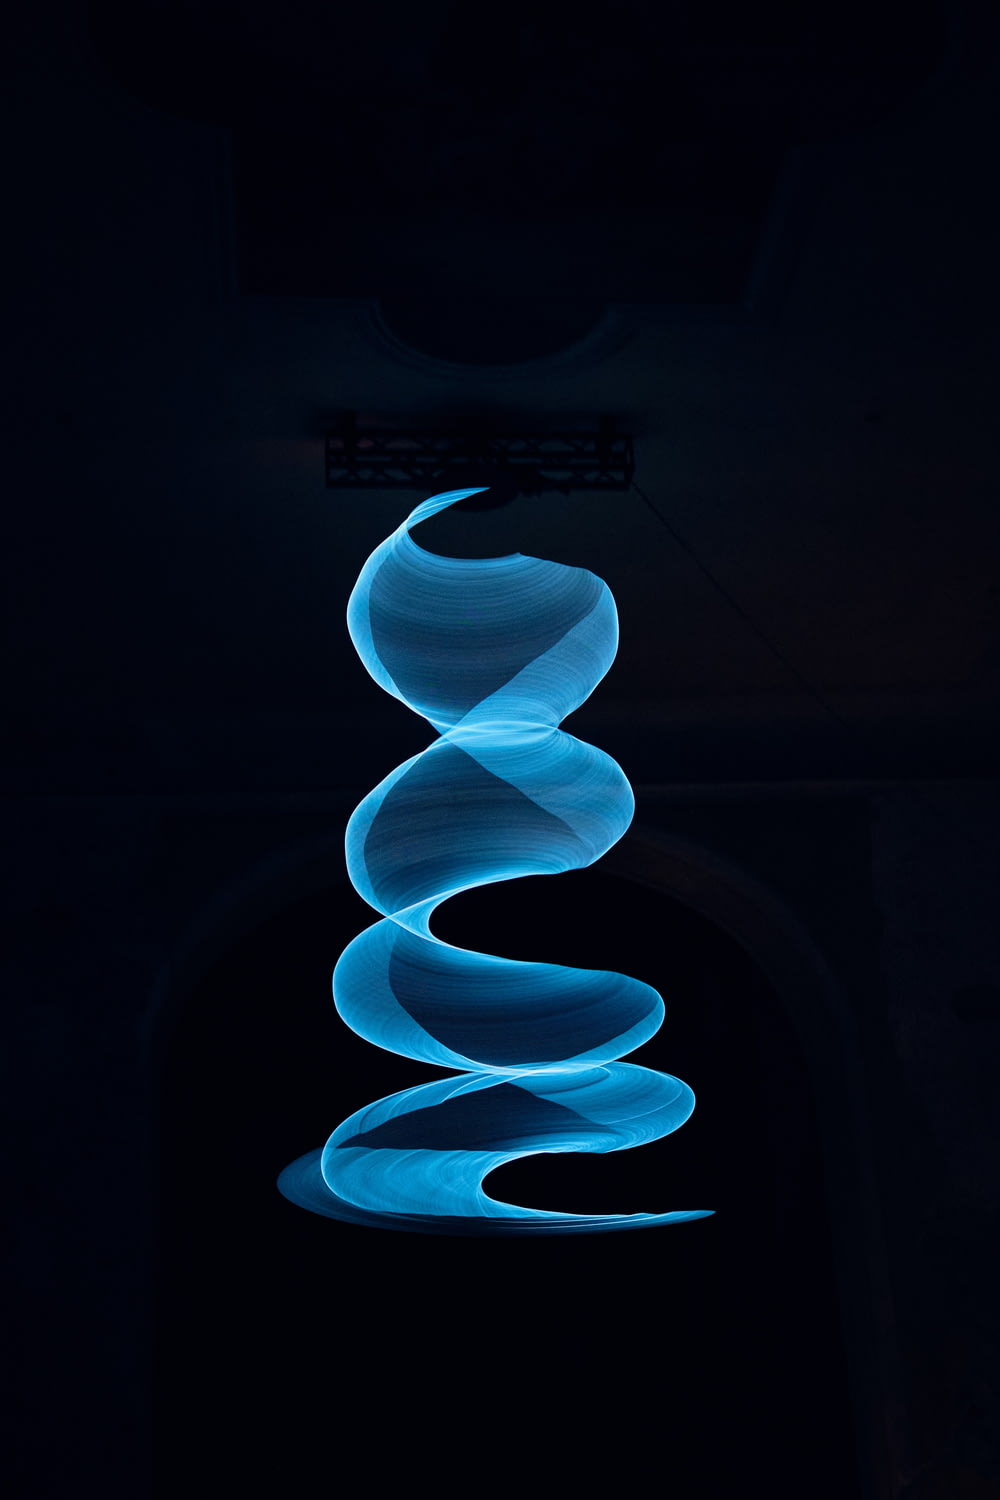 a black background with a blue spiral design